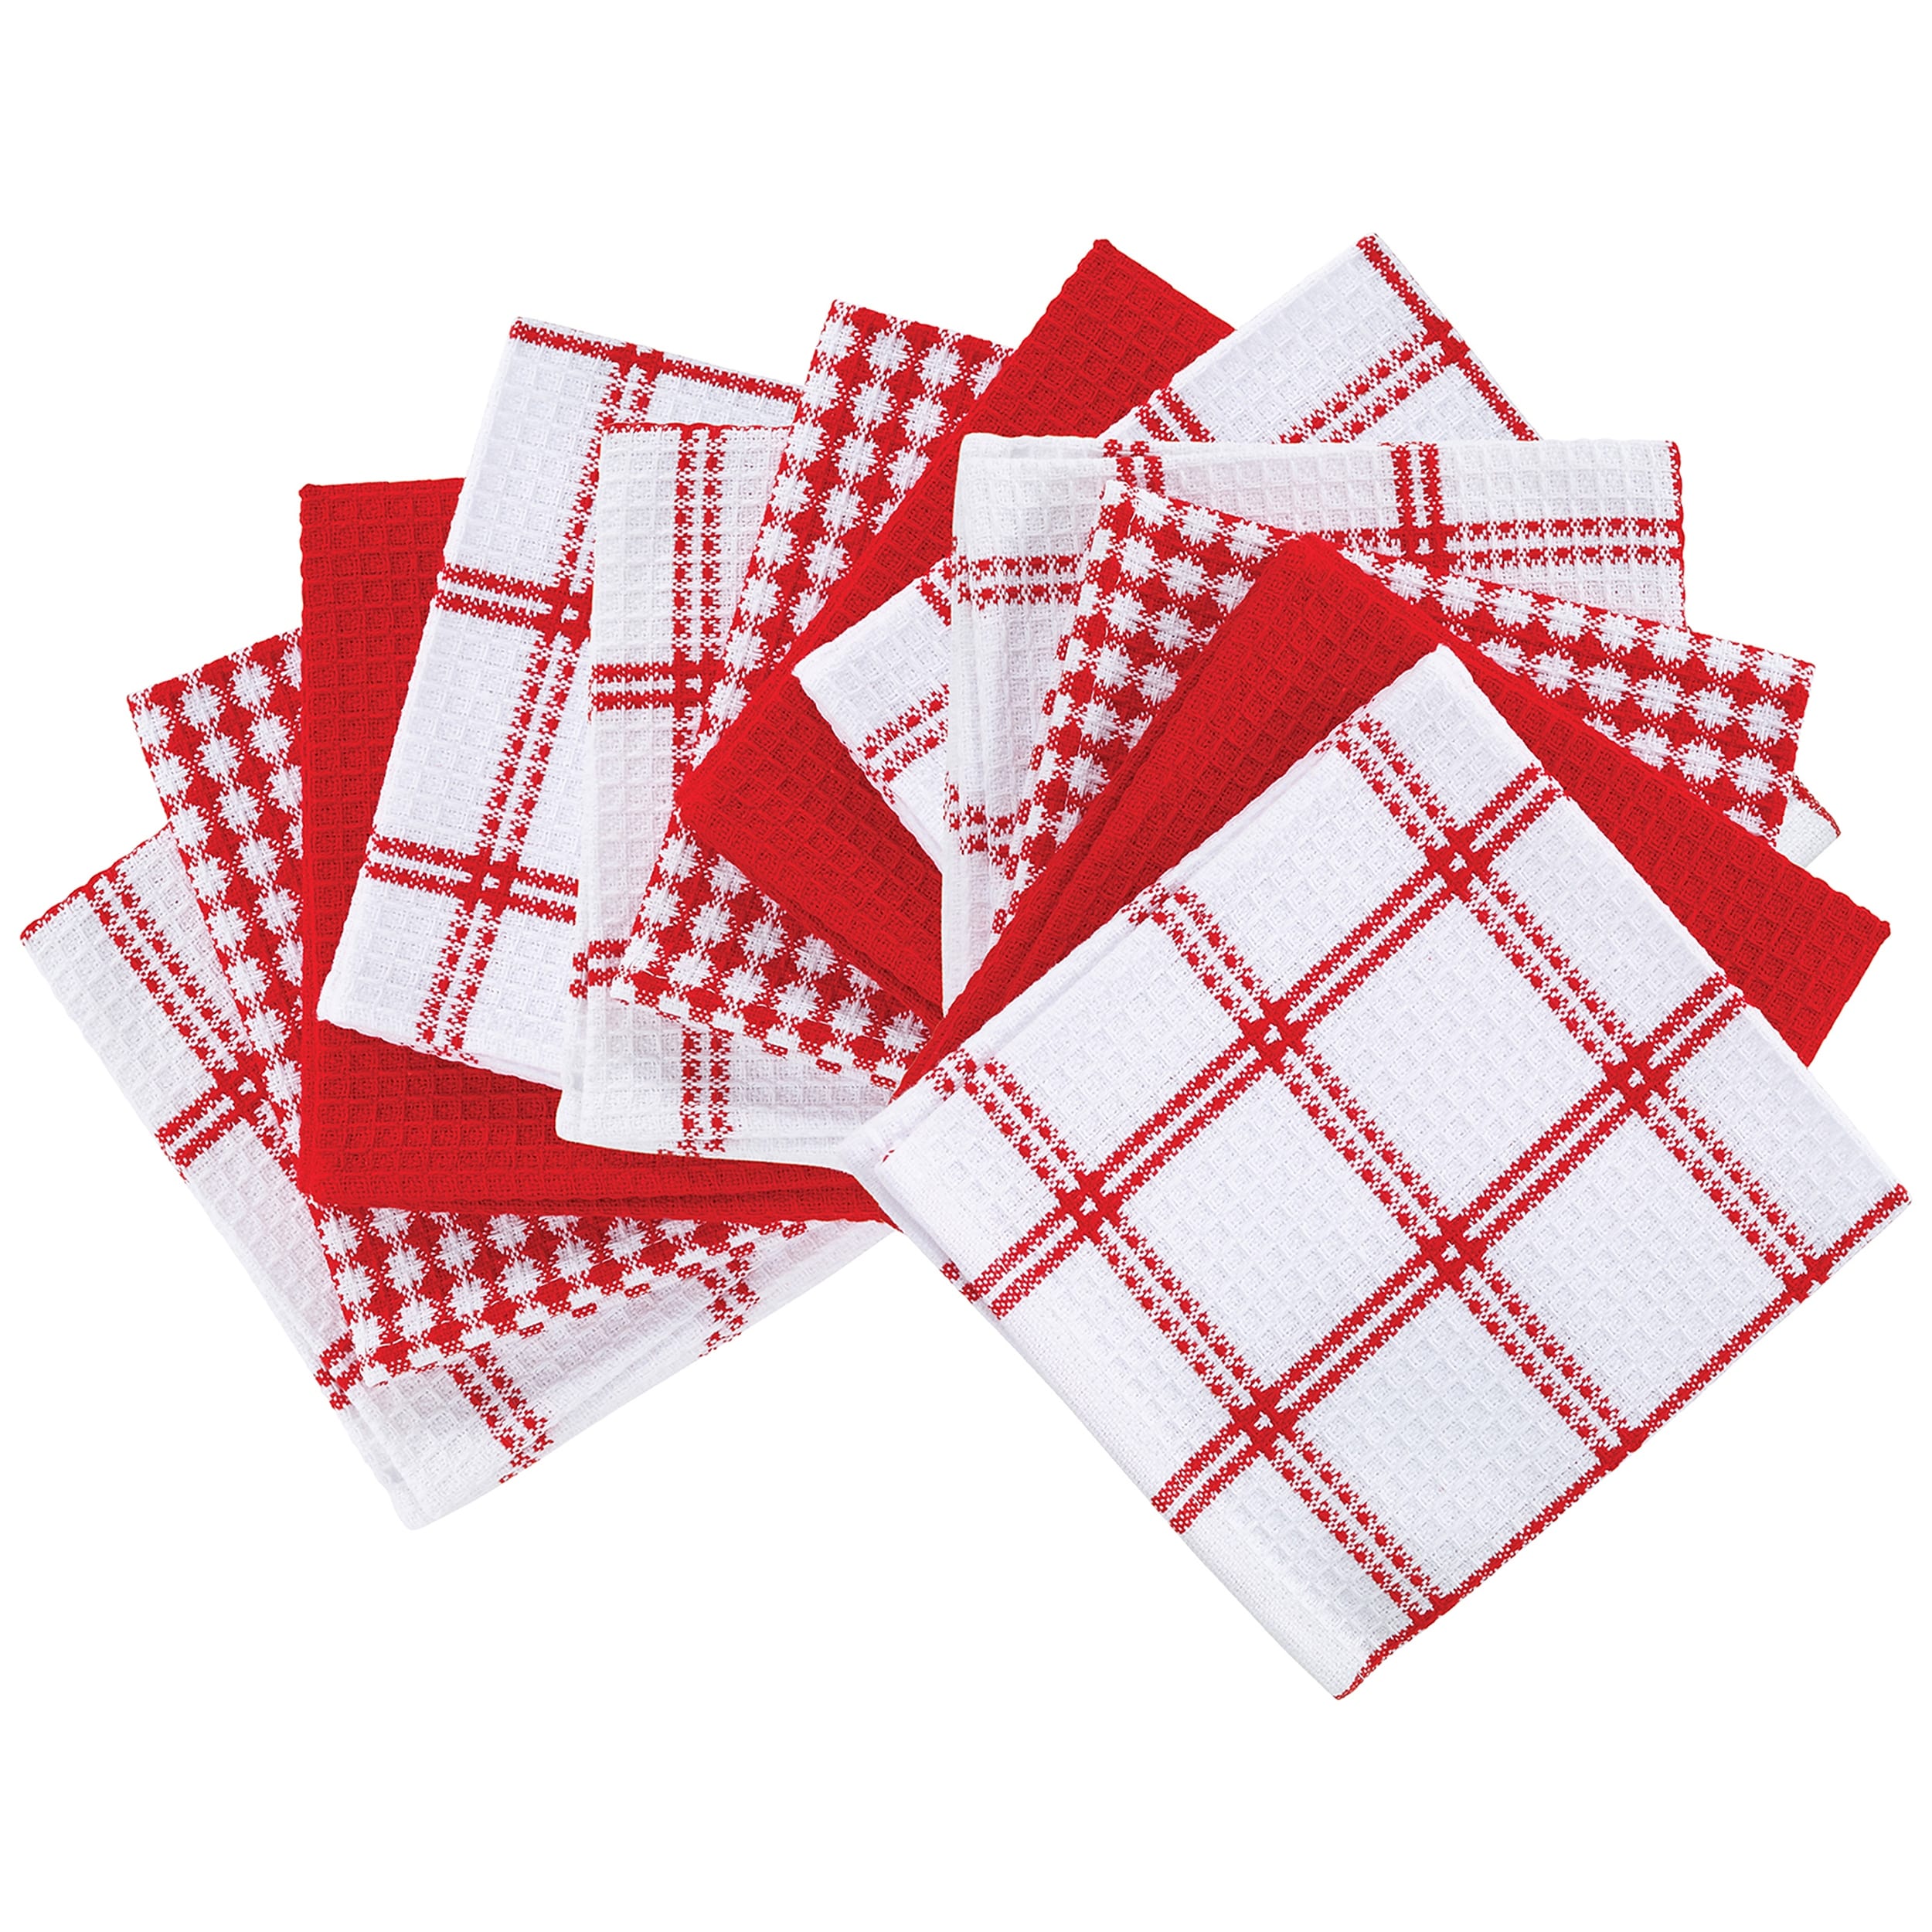 8-Pack 14 X 20 Inches Cotton Kitchen Towels Absorbent Waffle Dish